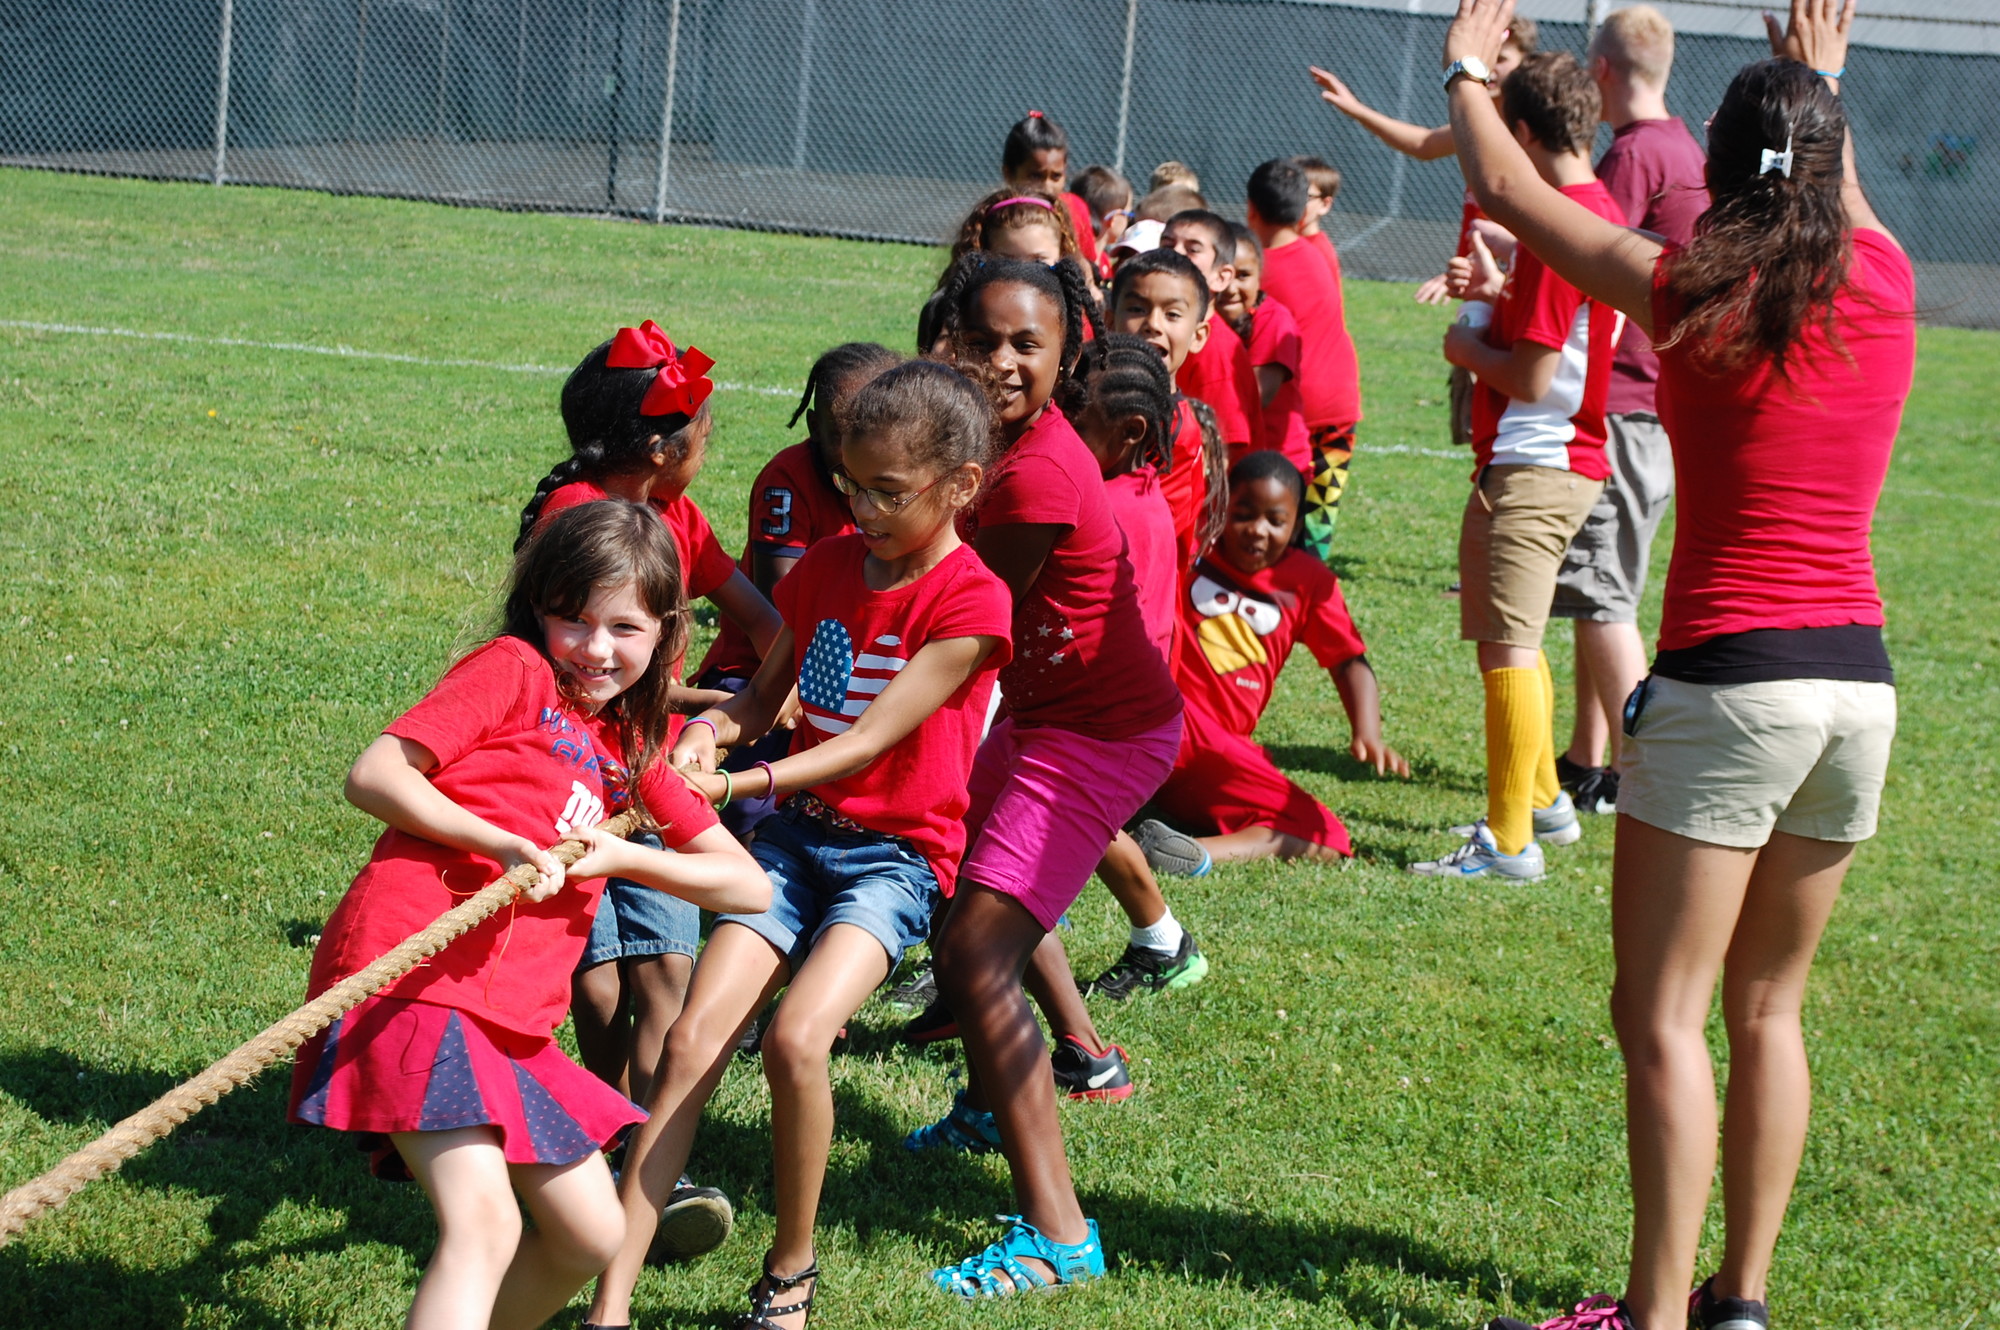 The red tried hard in the tug-of-war at Camp Barrett’s Color Wars competition on July 18.